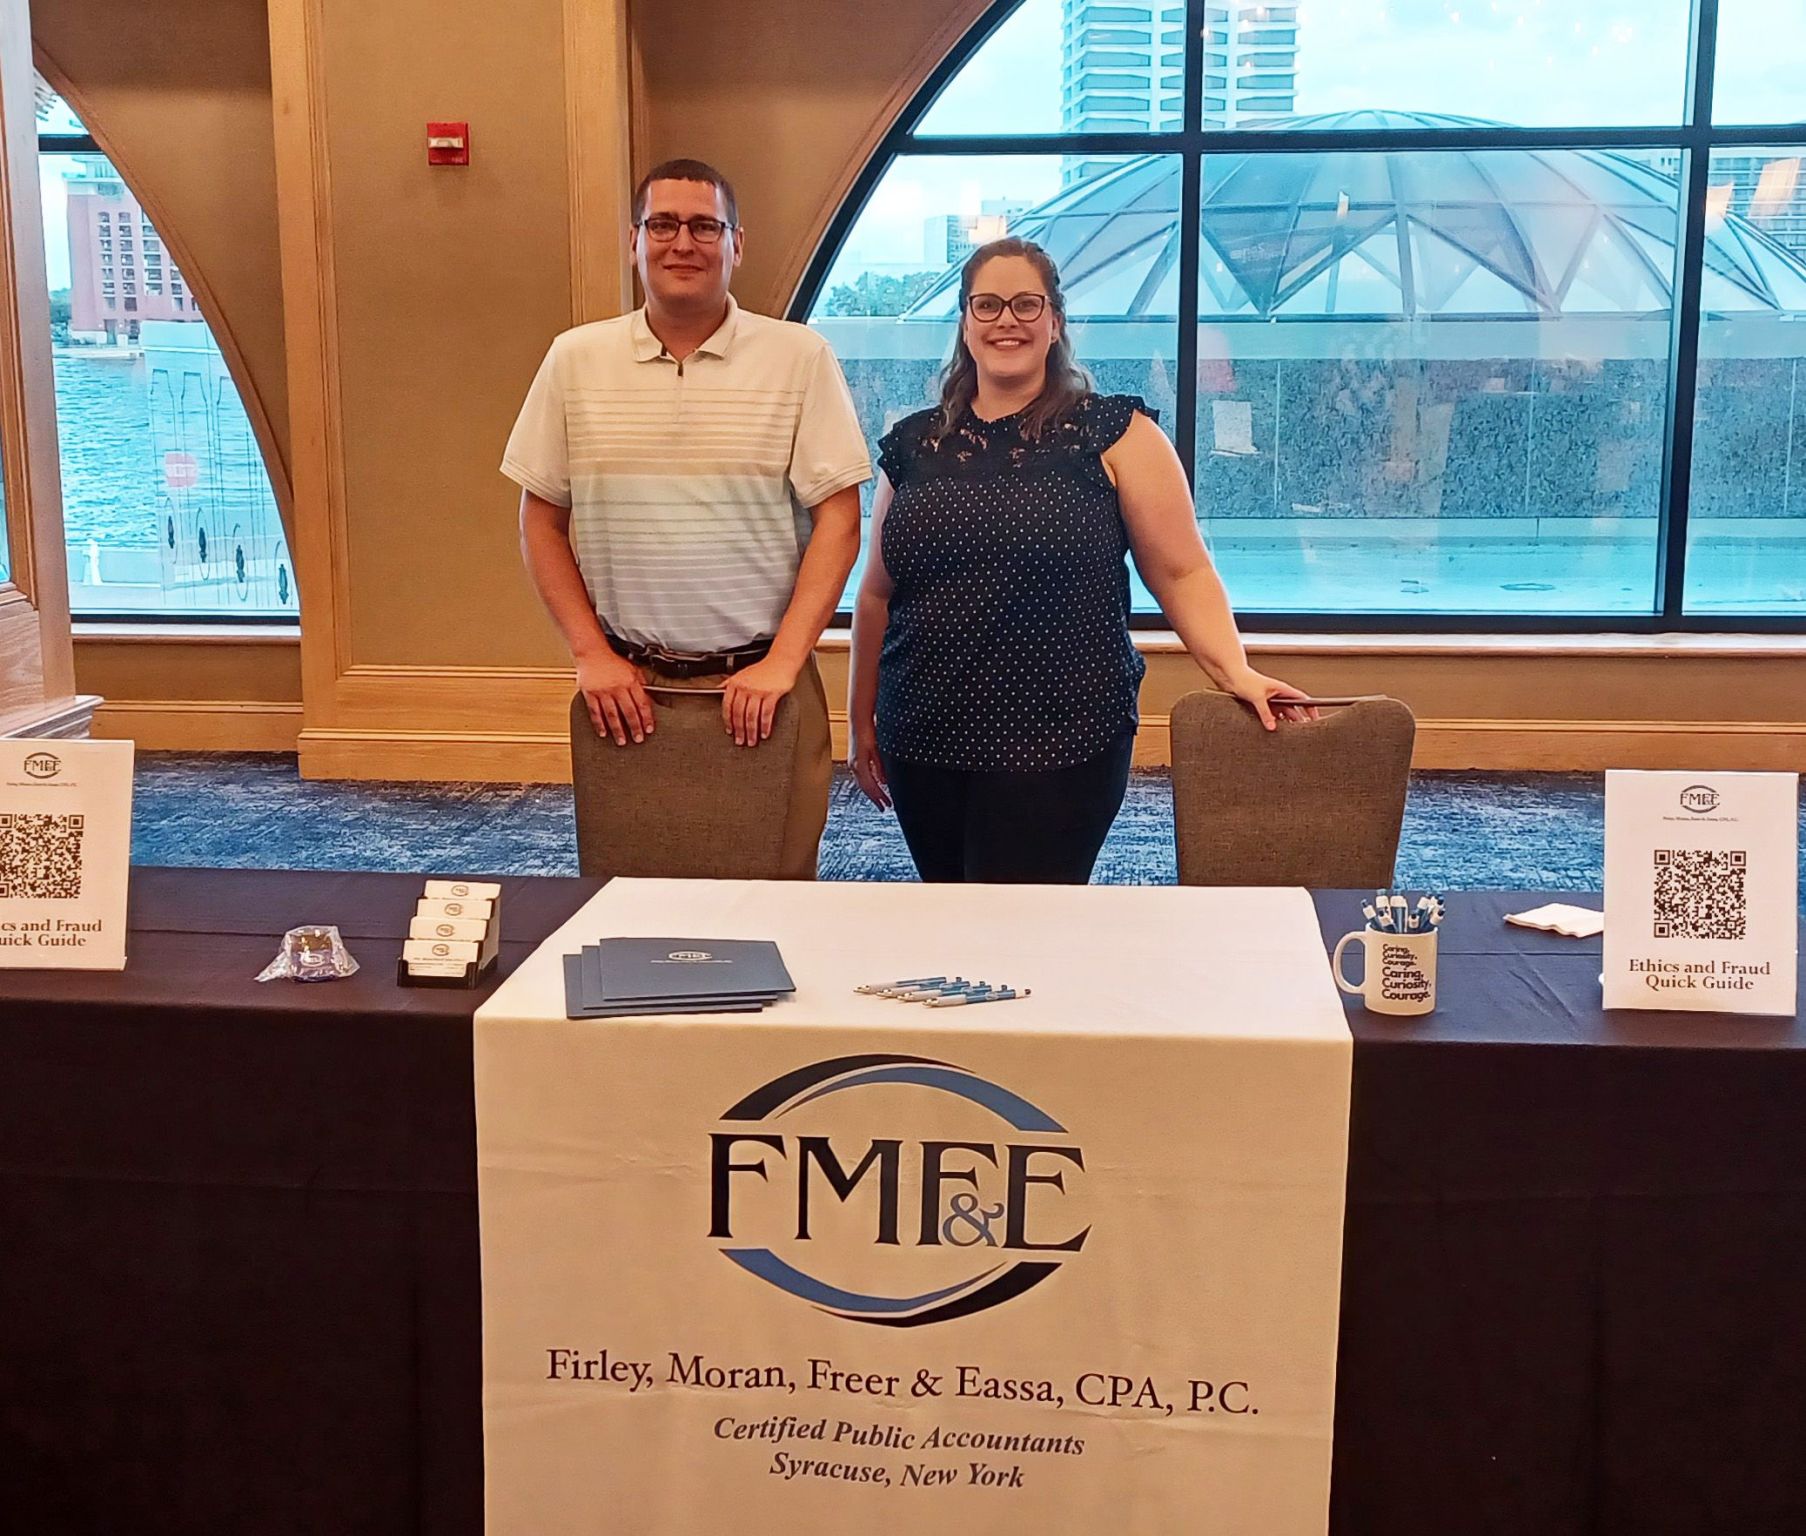 FMF&E Team Leads Ethics and Fraud Discussion image